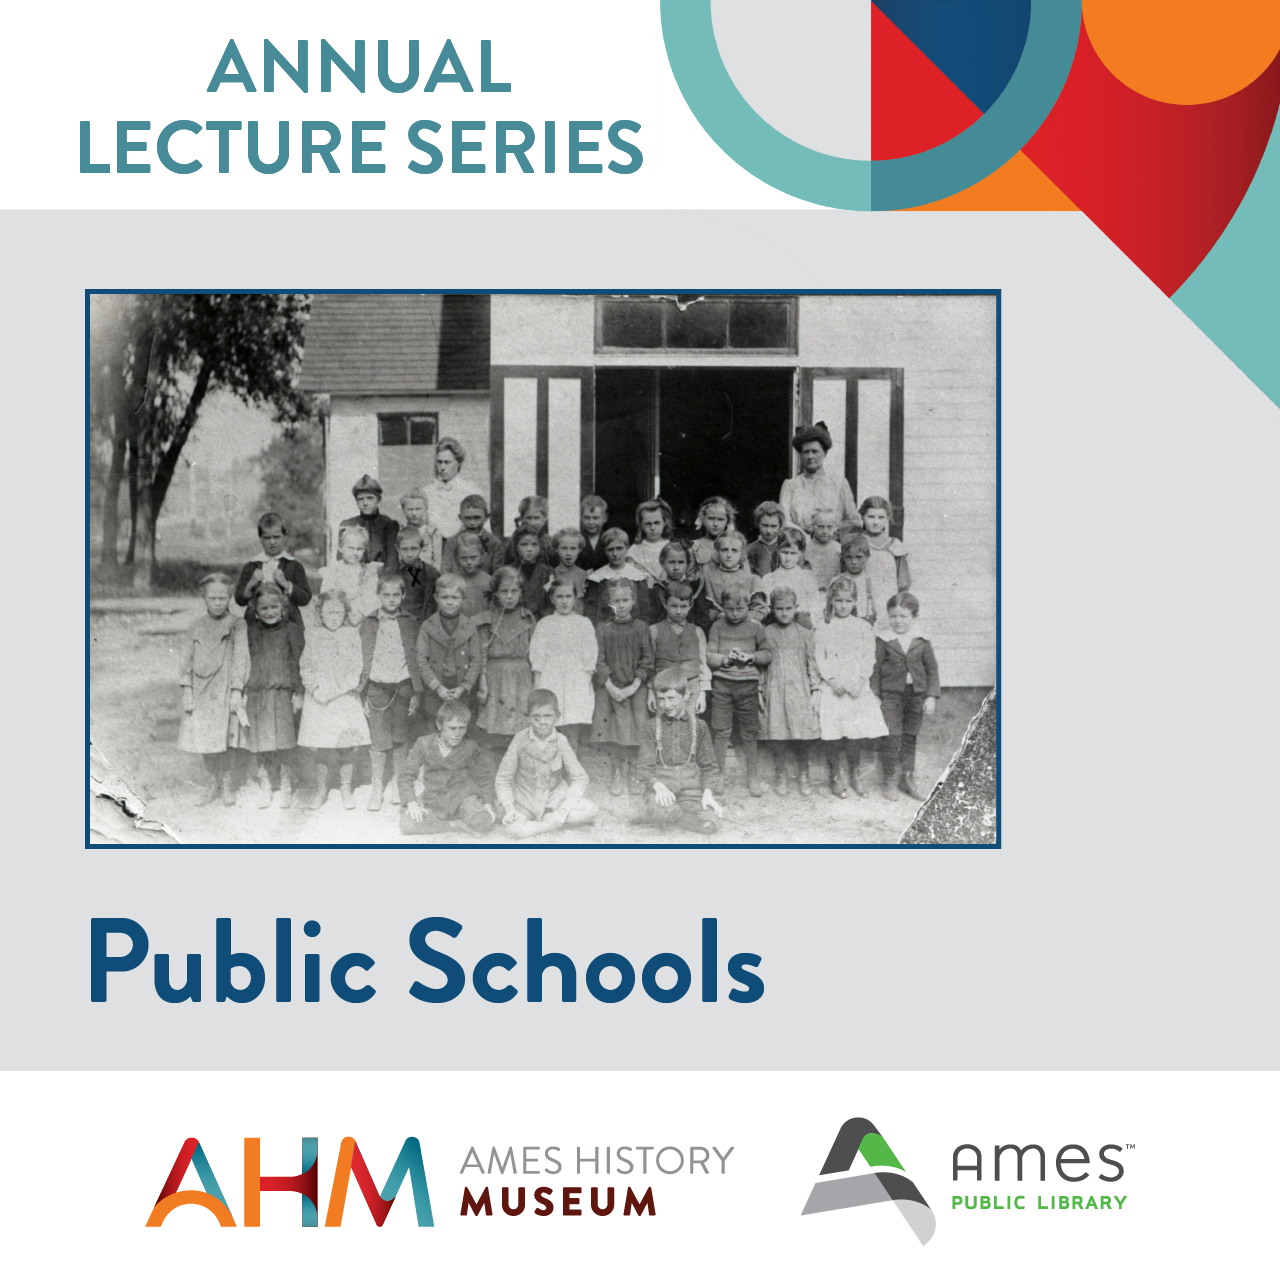 Ames History Museum Annual Lecture Series: Public Schools